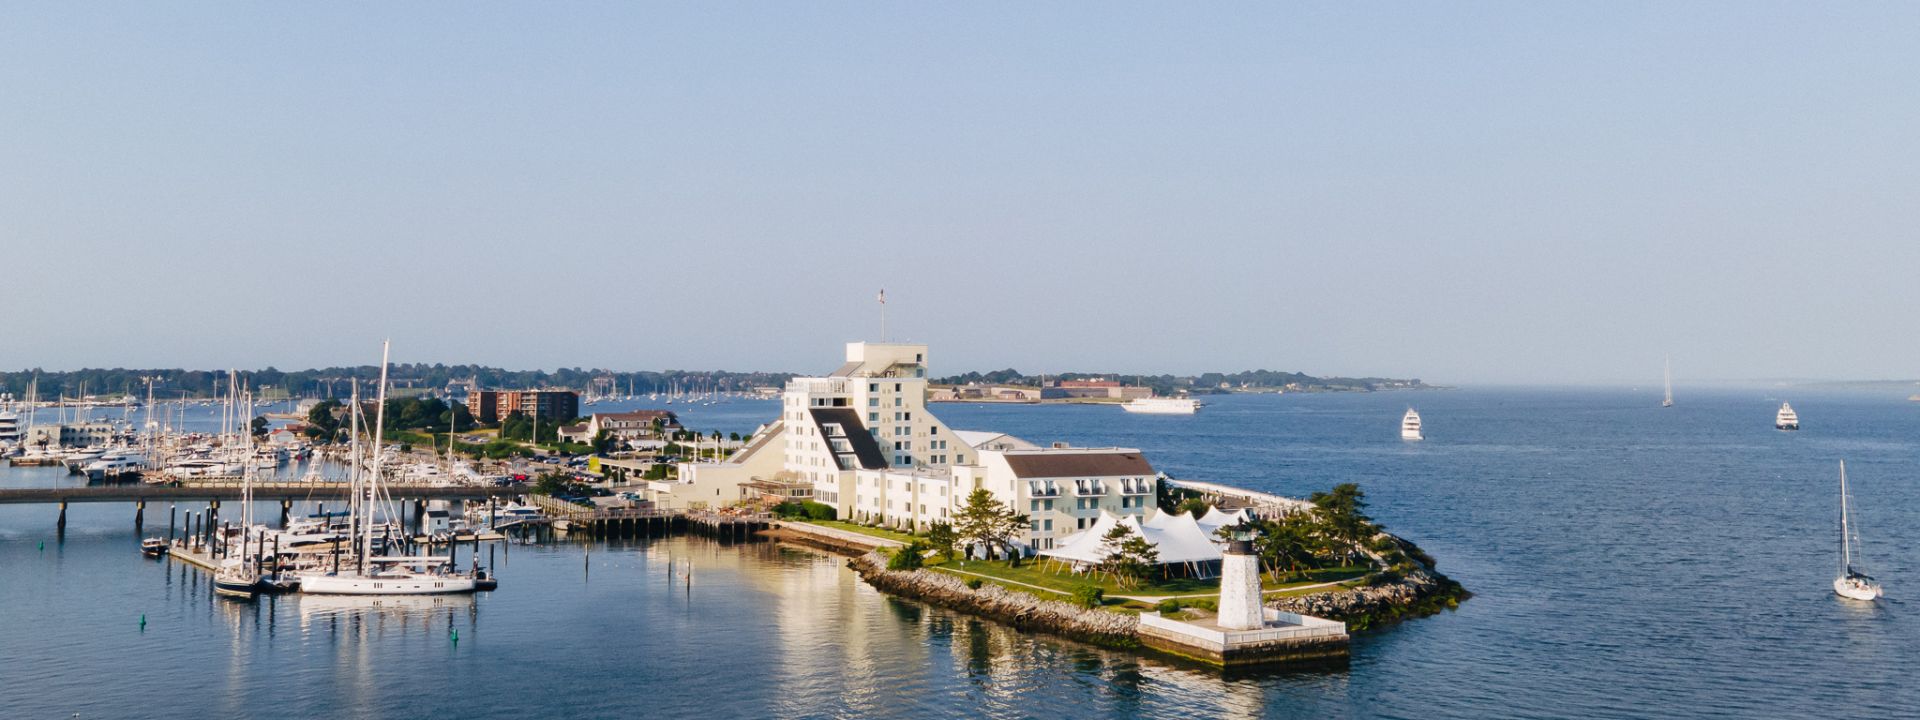 An aerial photo over the hotel showing the marina, building, and surrounding bay